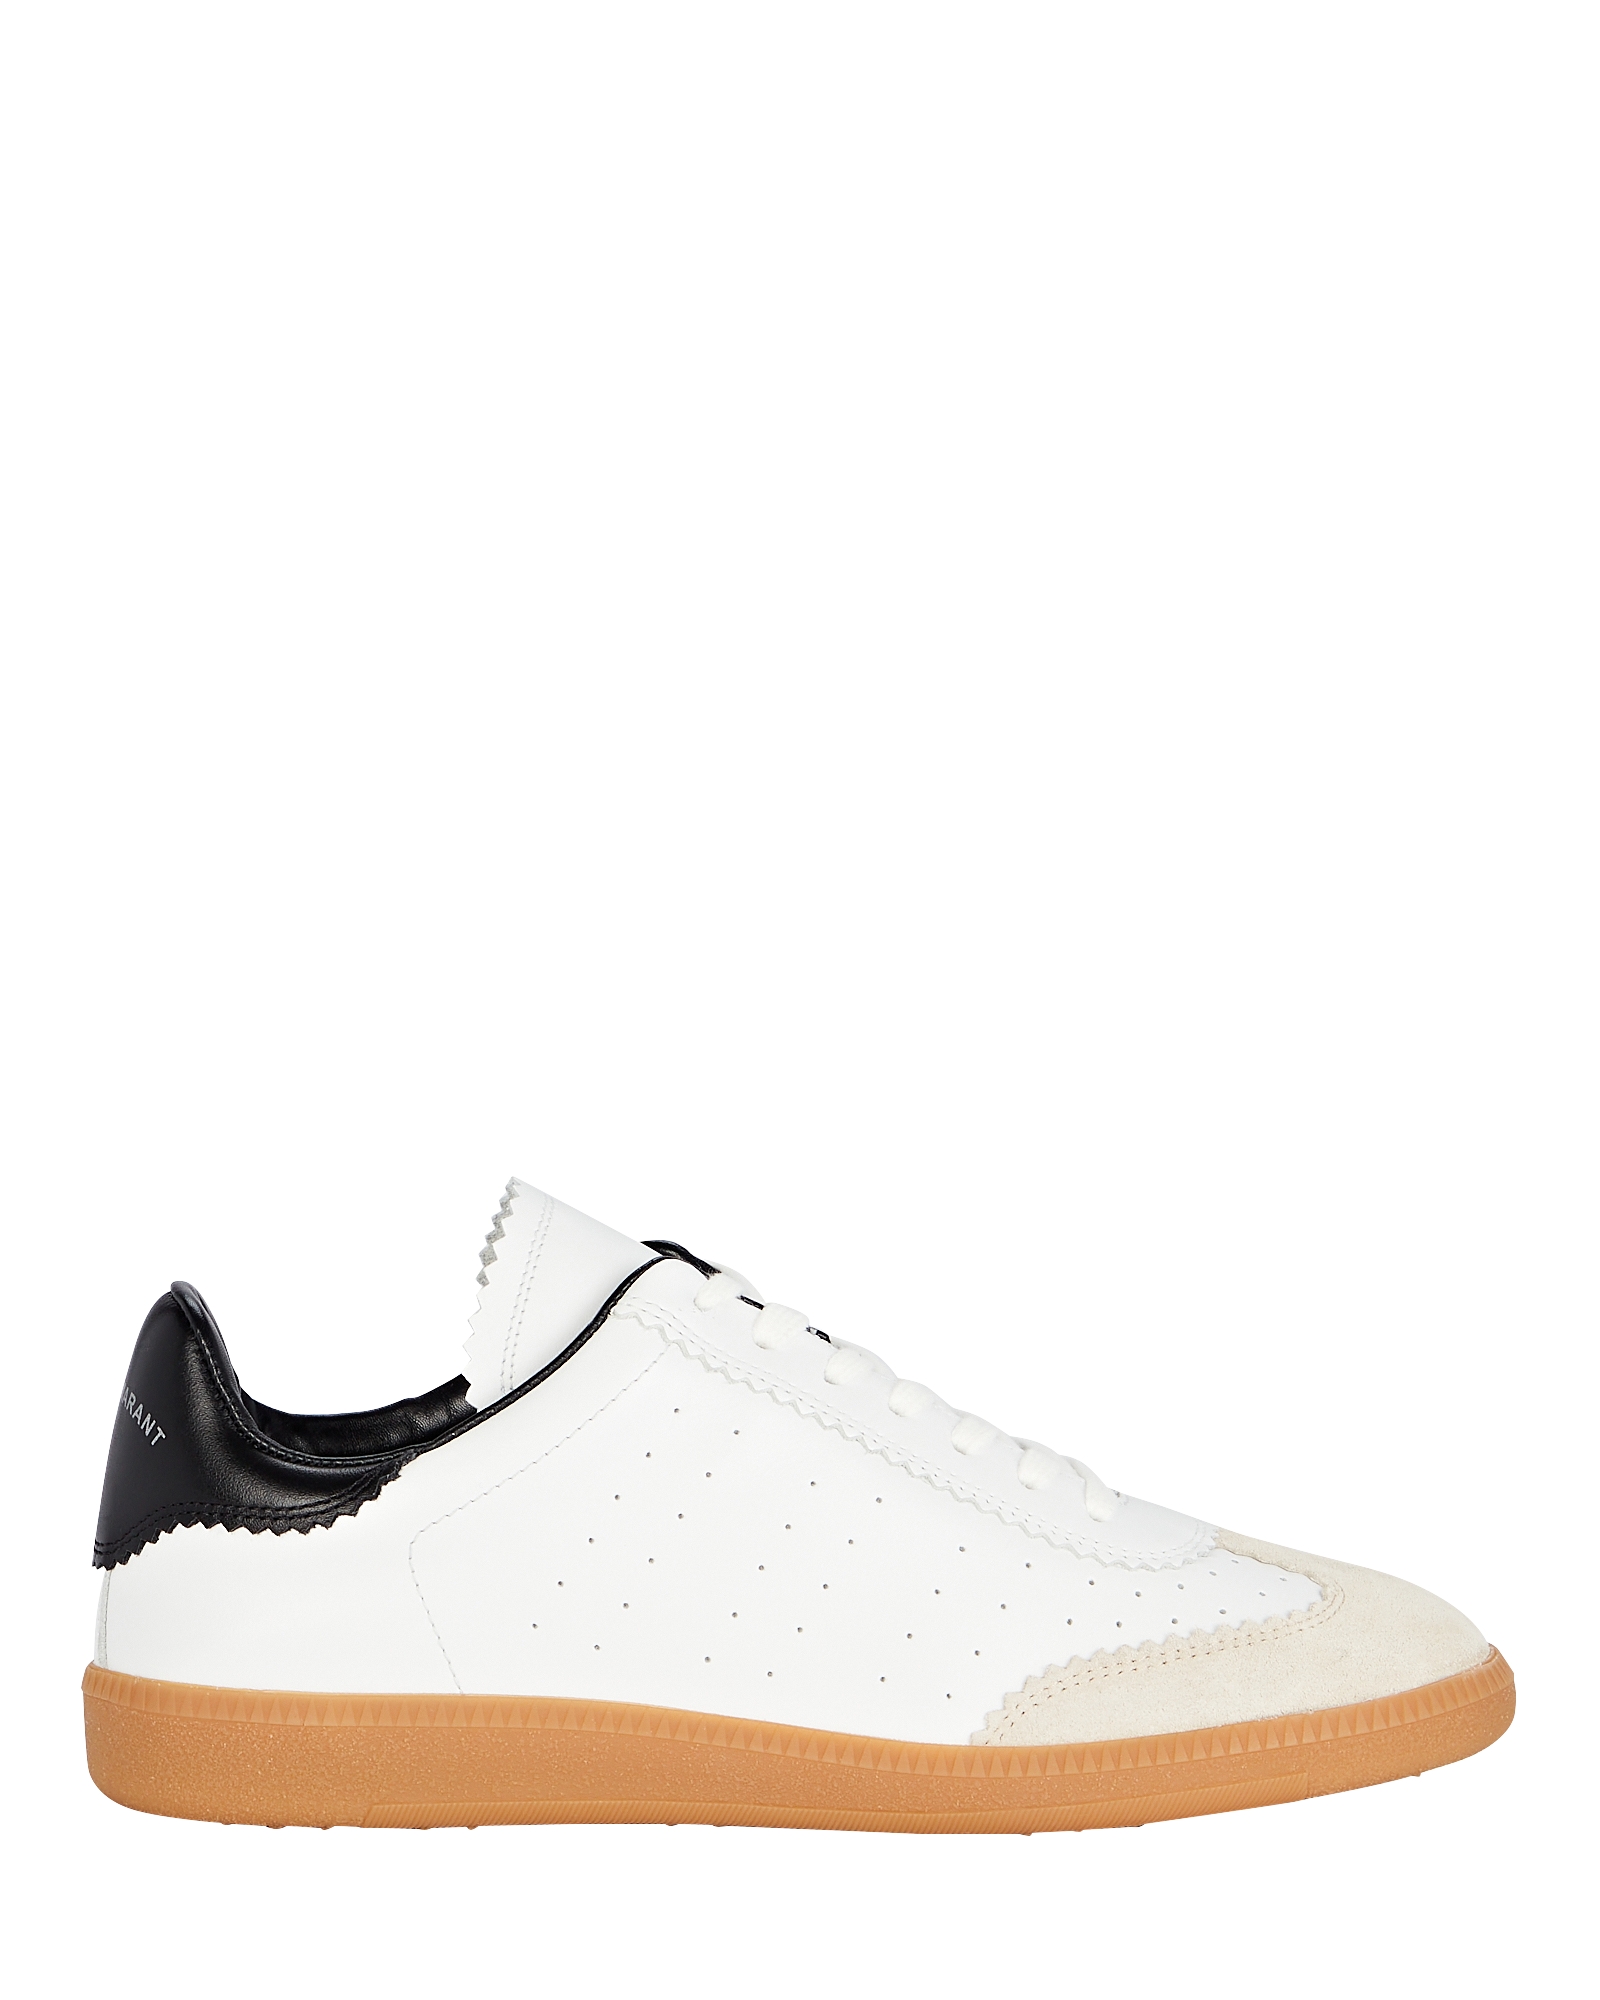 Isabel Marant Bryce Low-Top Leather Sneakers | INTERMIX®